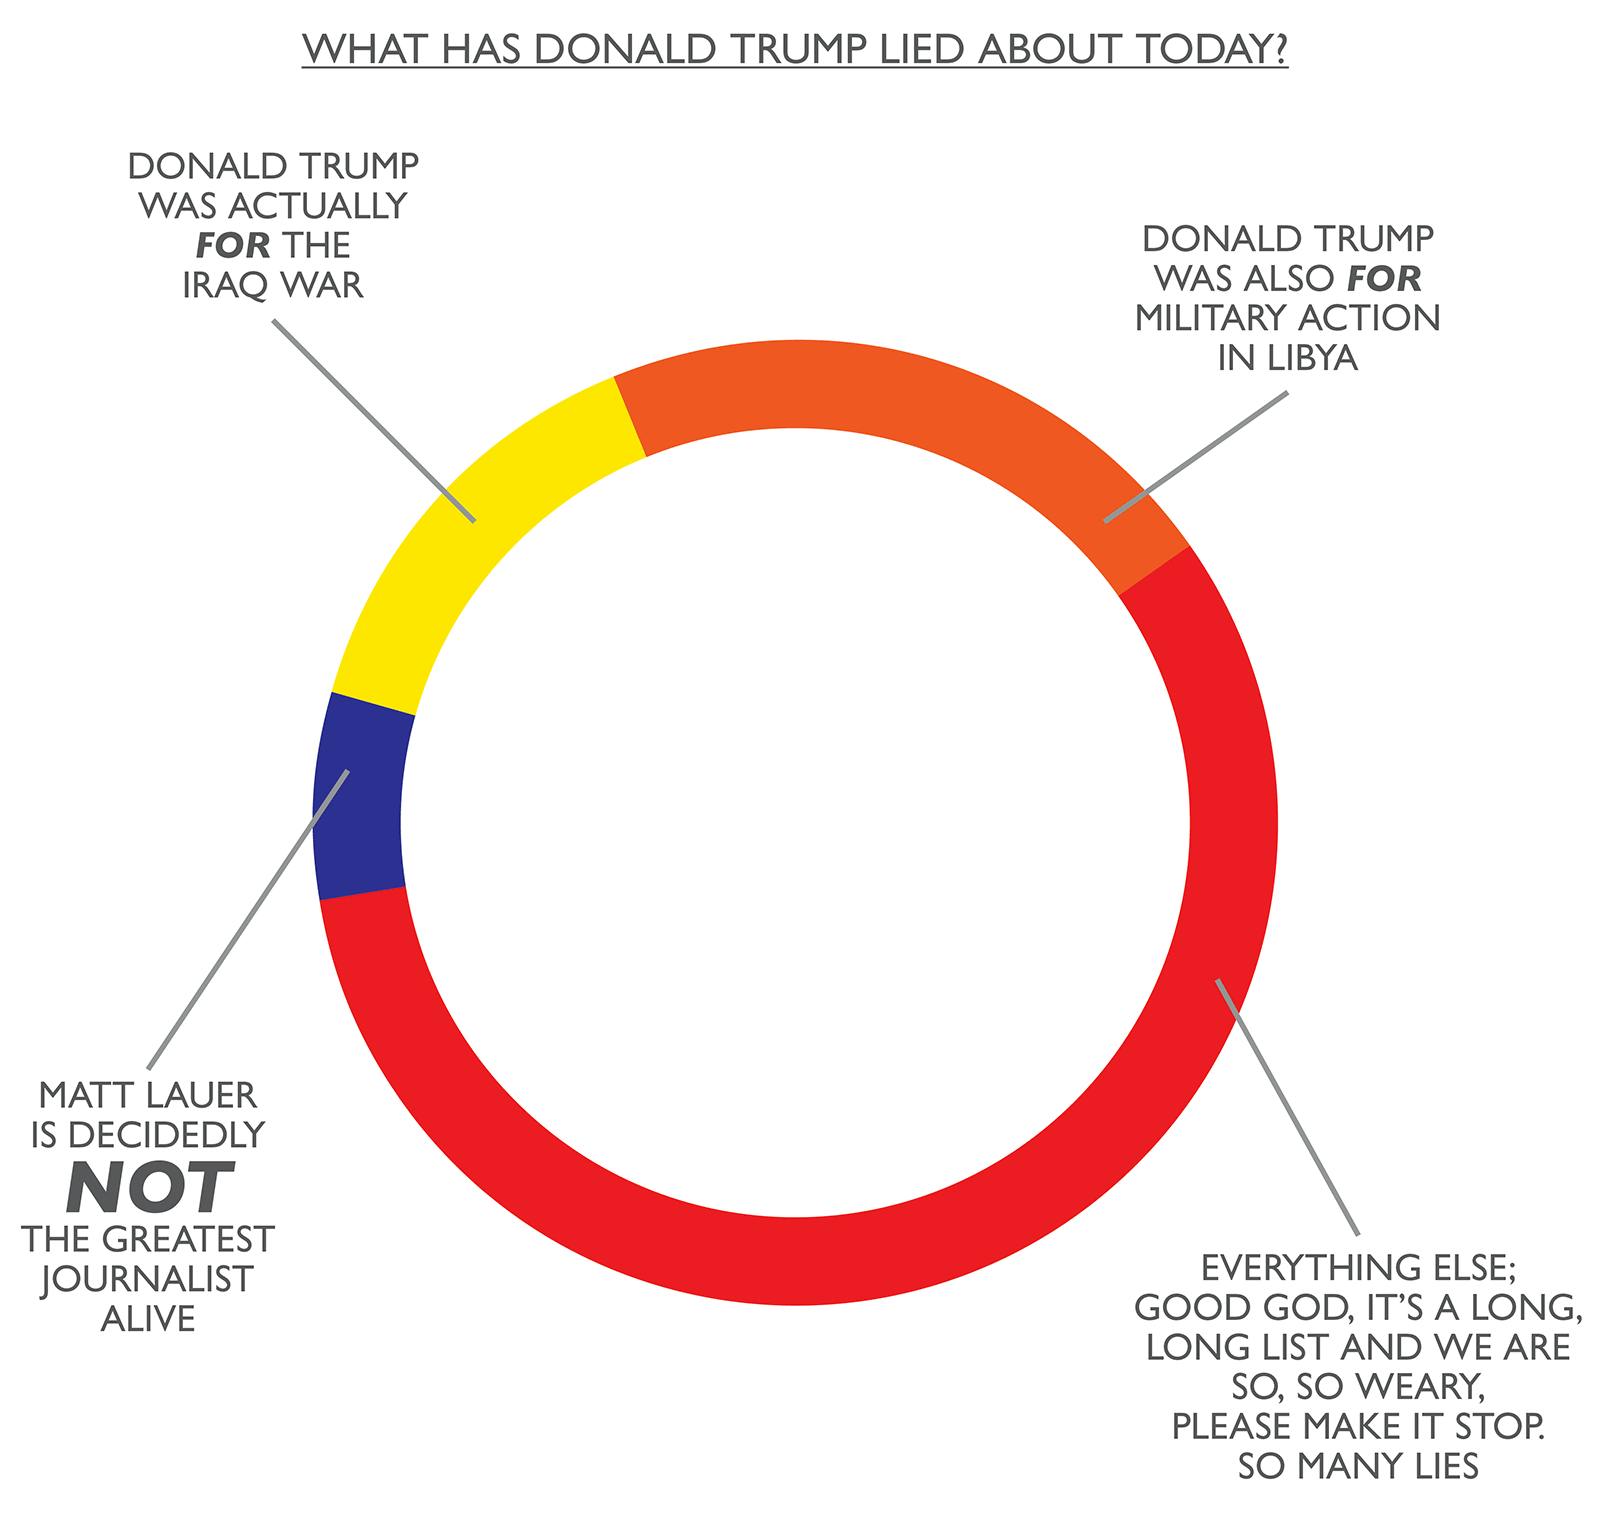 chart-what-has-donald-trump-lied-about-today-1-4088ae.png